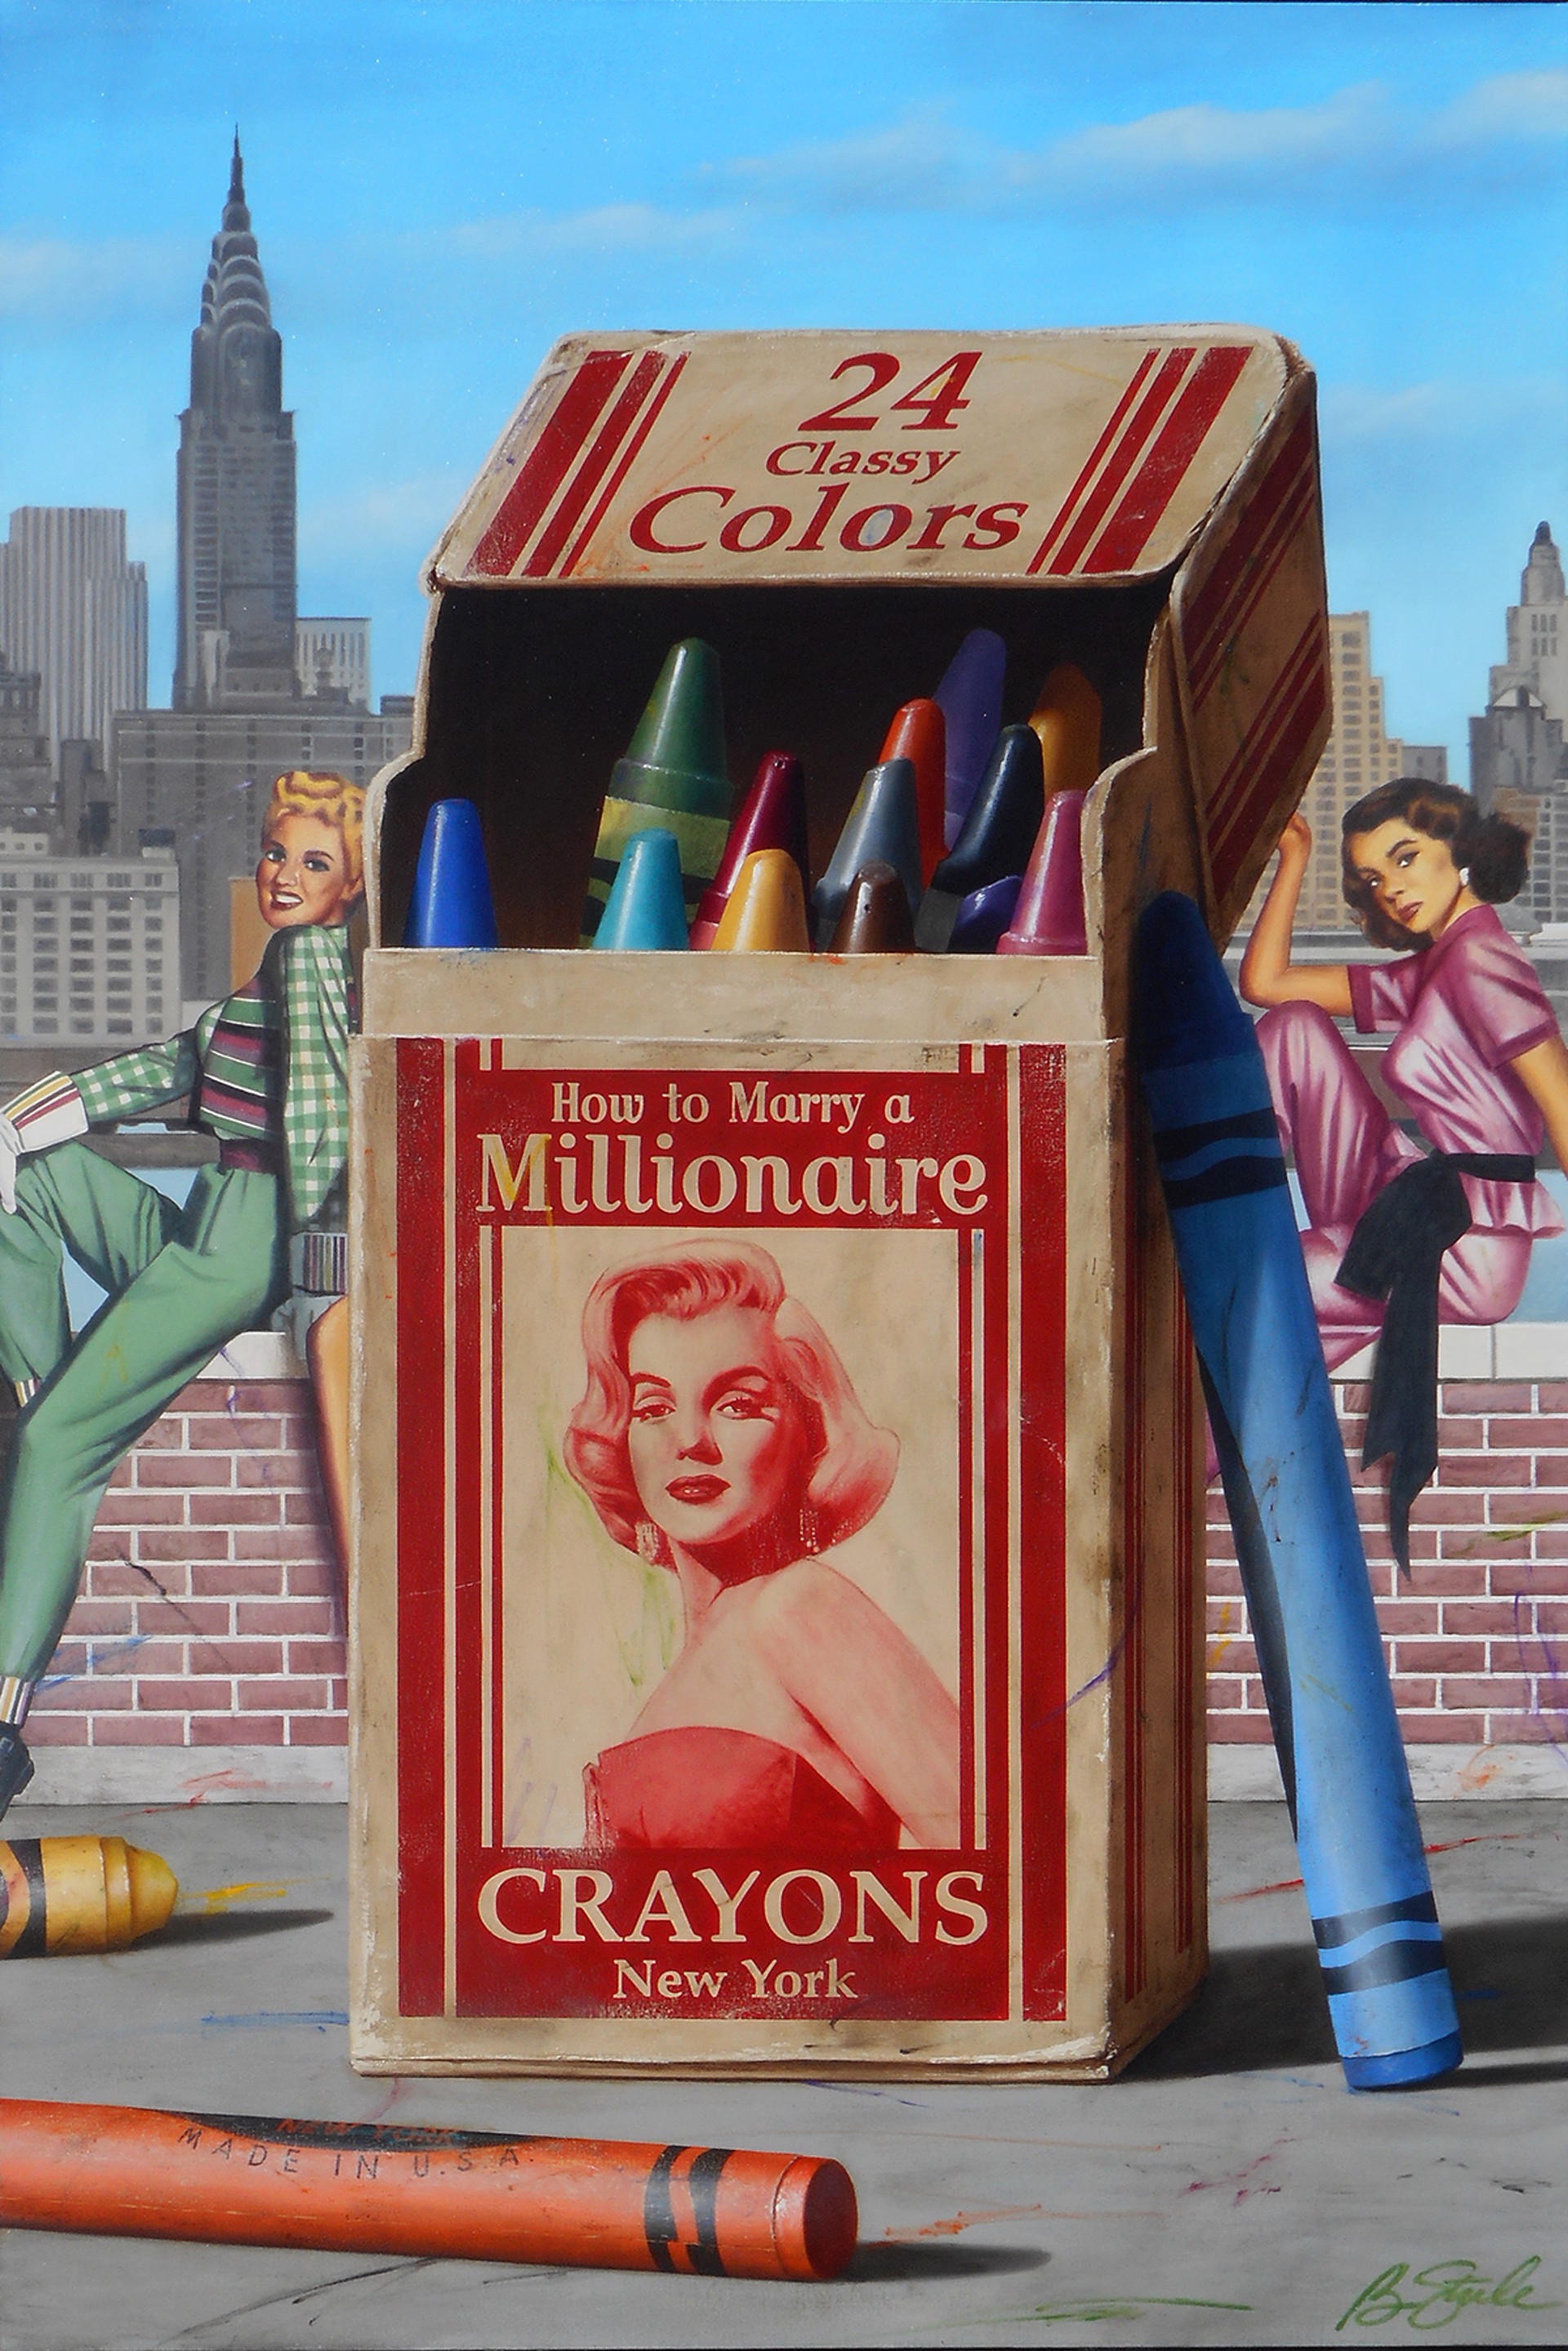 Millionaire Crayons by BEN STEELE